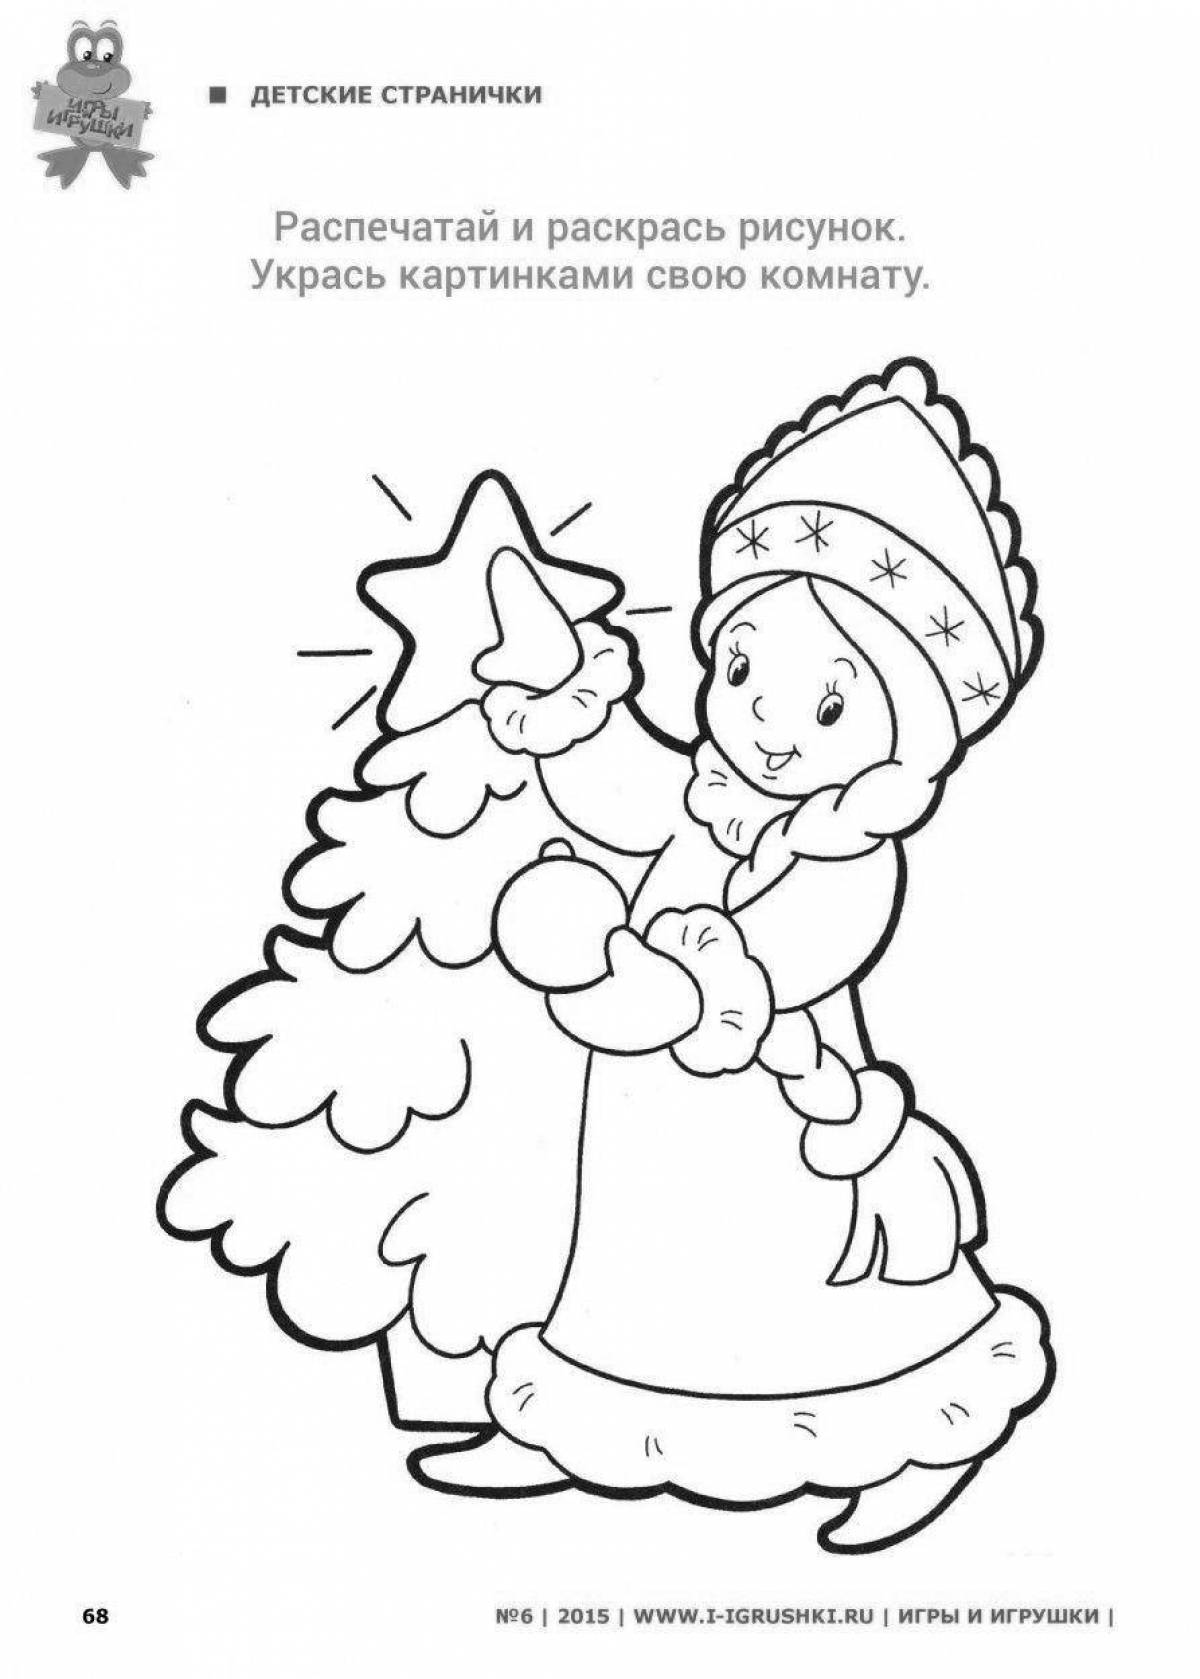 Snow Maiden holiday coloring book